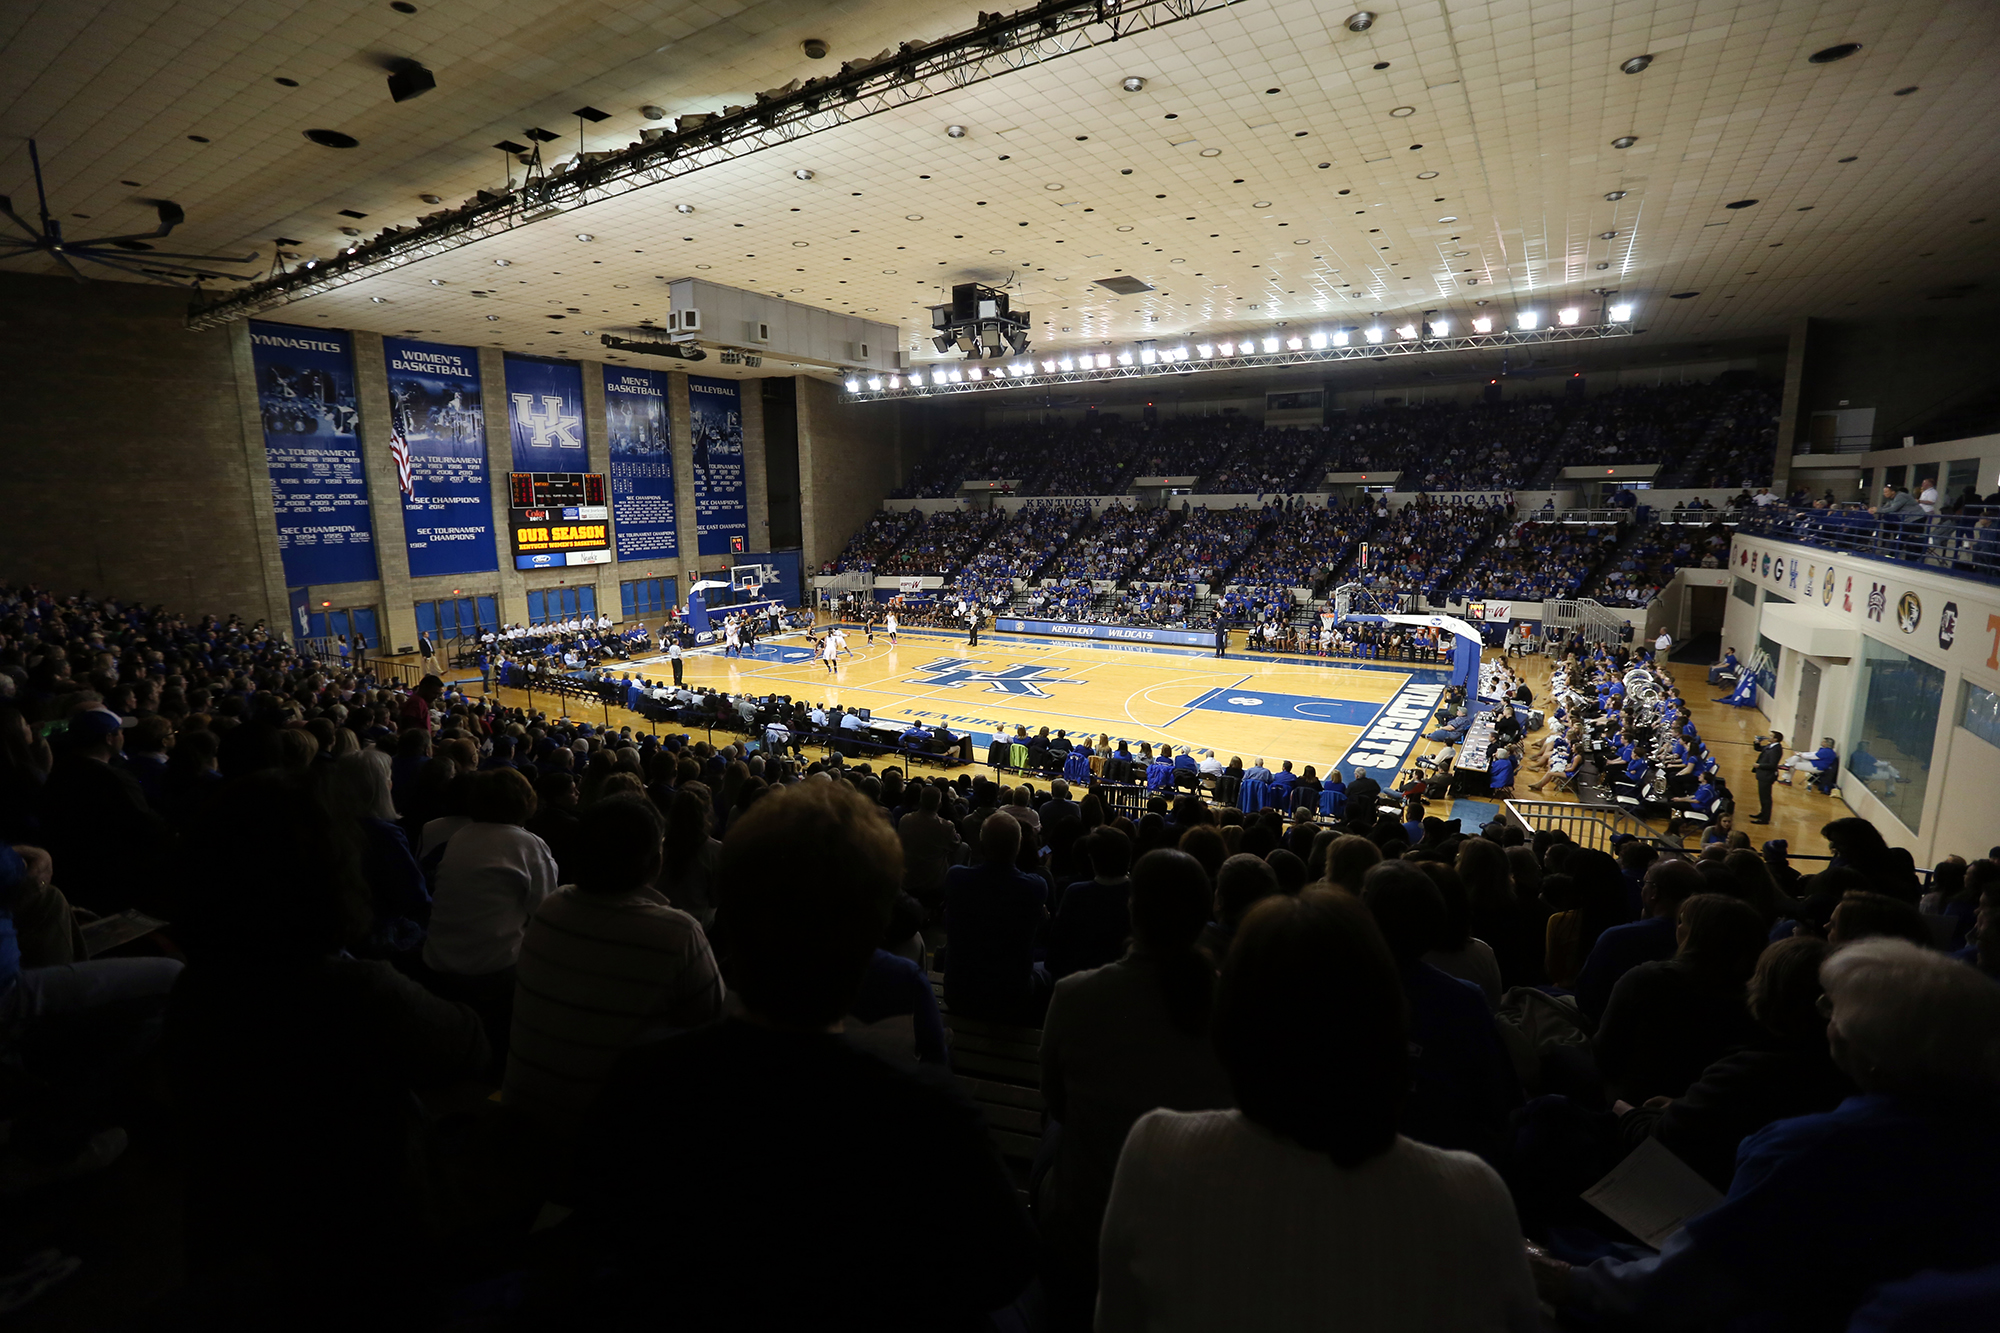 UK Hoops Announces 2015-16 Non-Conference Schedule